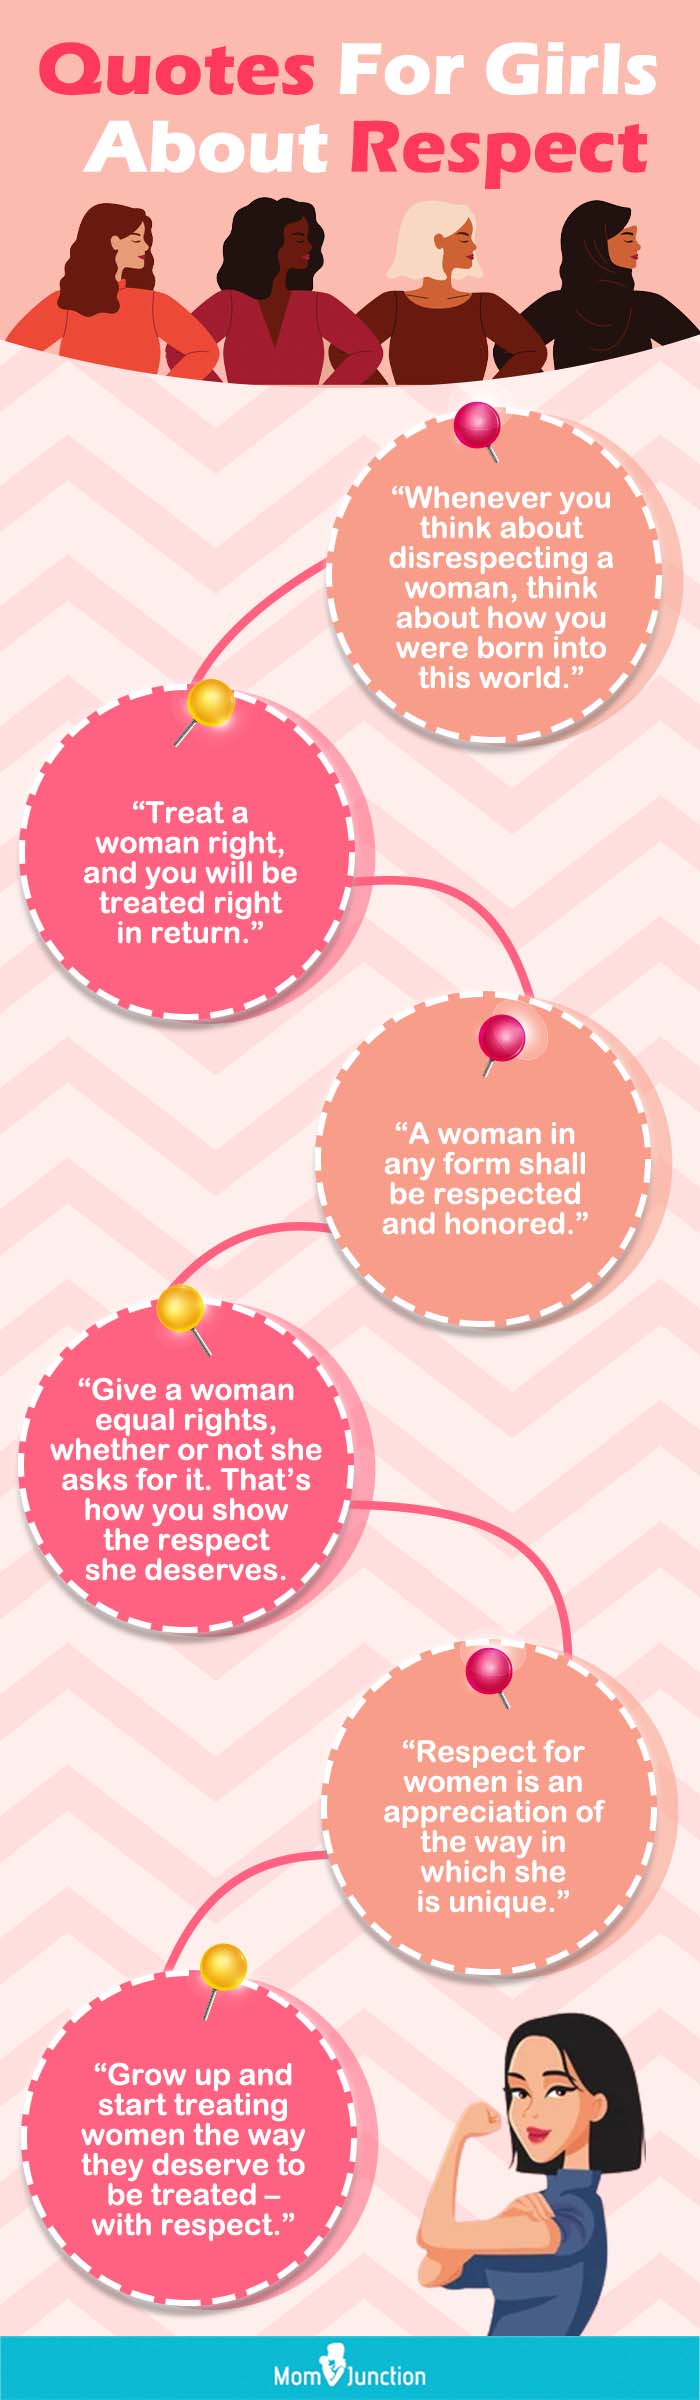 quotes for girls about respect (infographic)